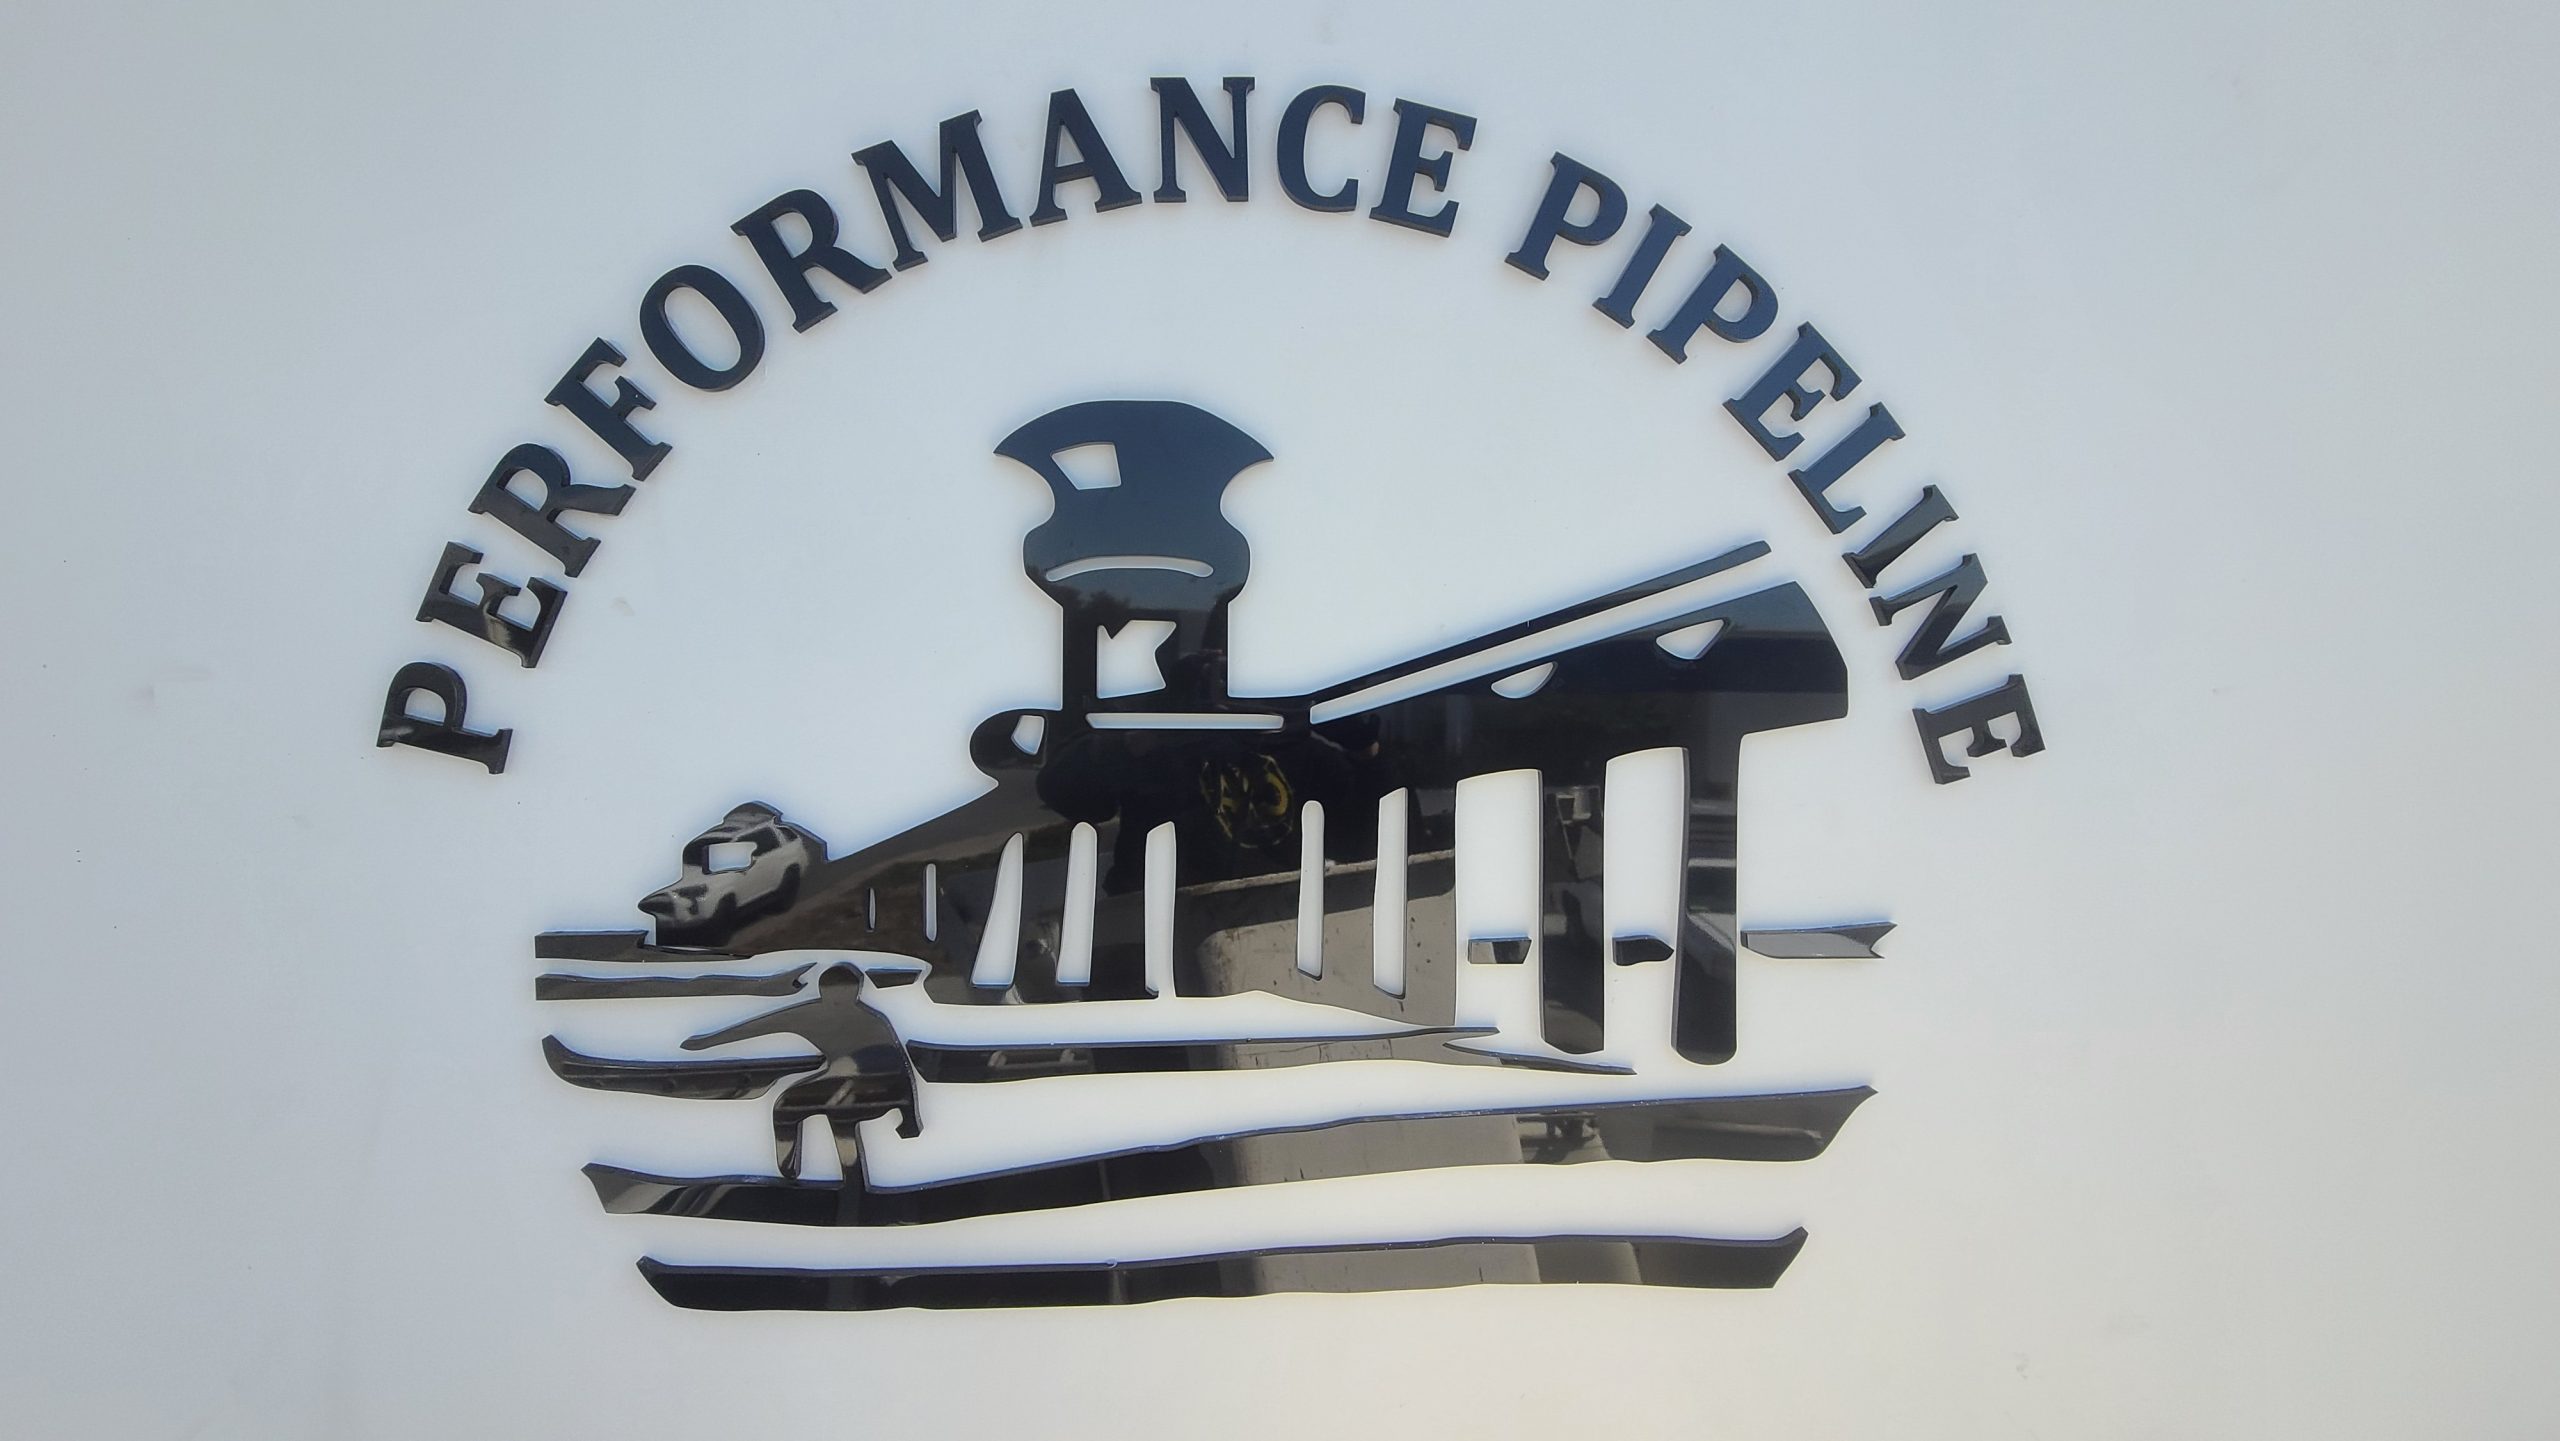 A closer look of the company logo and address numbers signs we made for Performance Pipeline in Huntington.